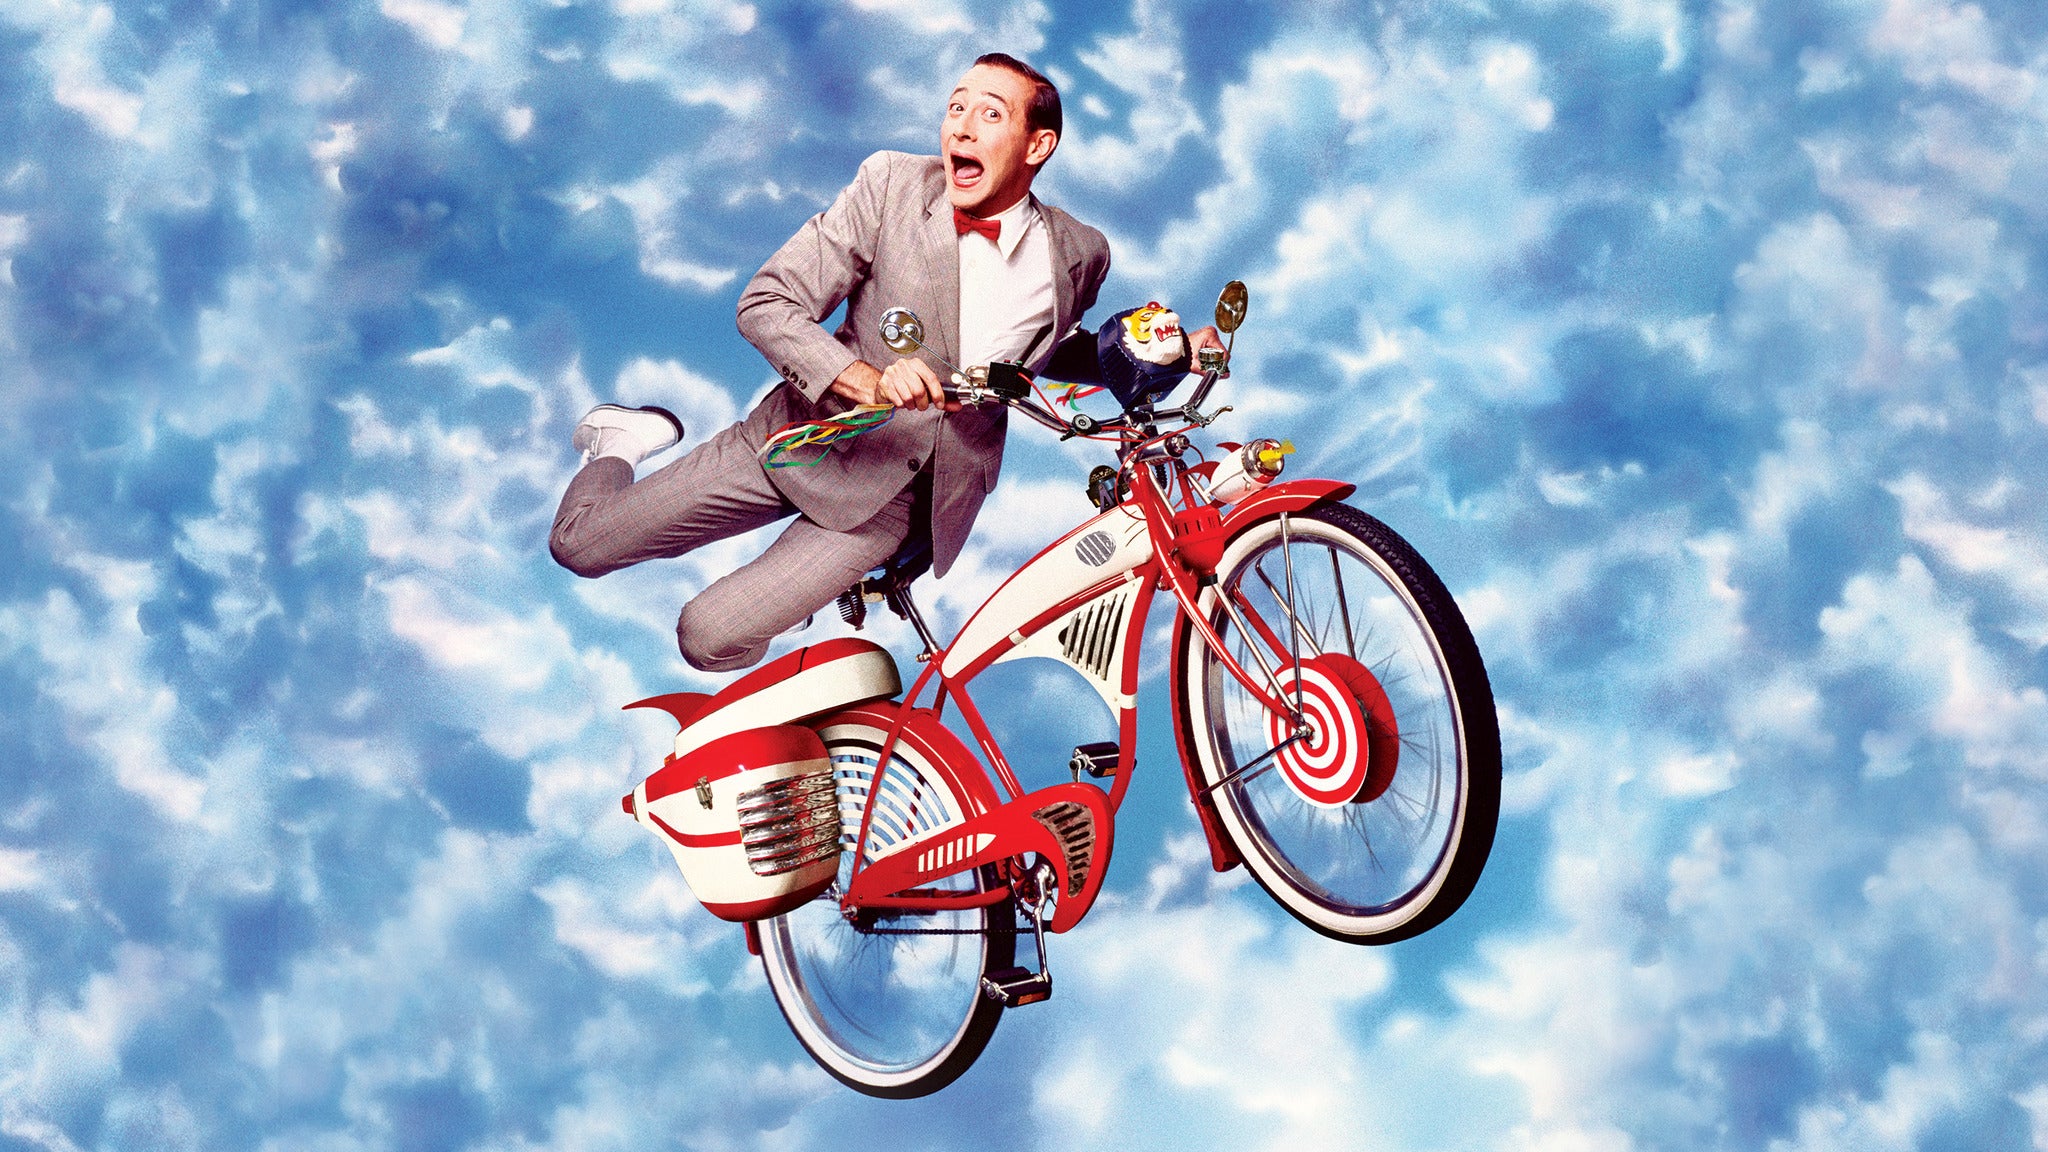 Pee-wee's Big Adventure 35th Anniversary Tour with Paul Reubens in Los Angeles promo photo for Artist presale offer code